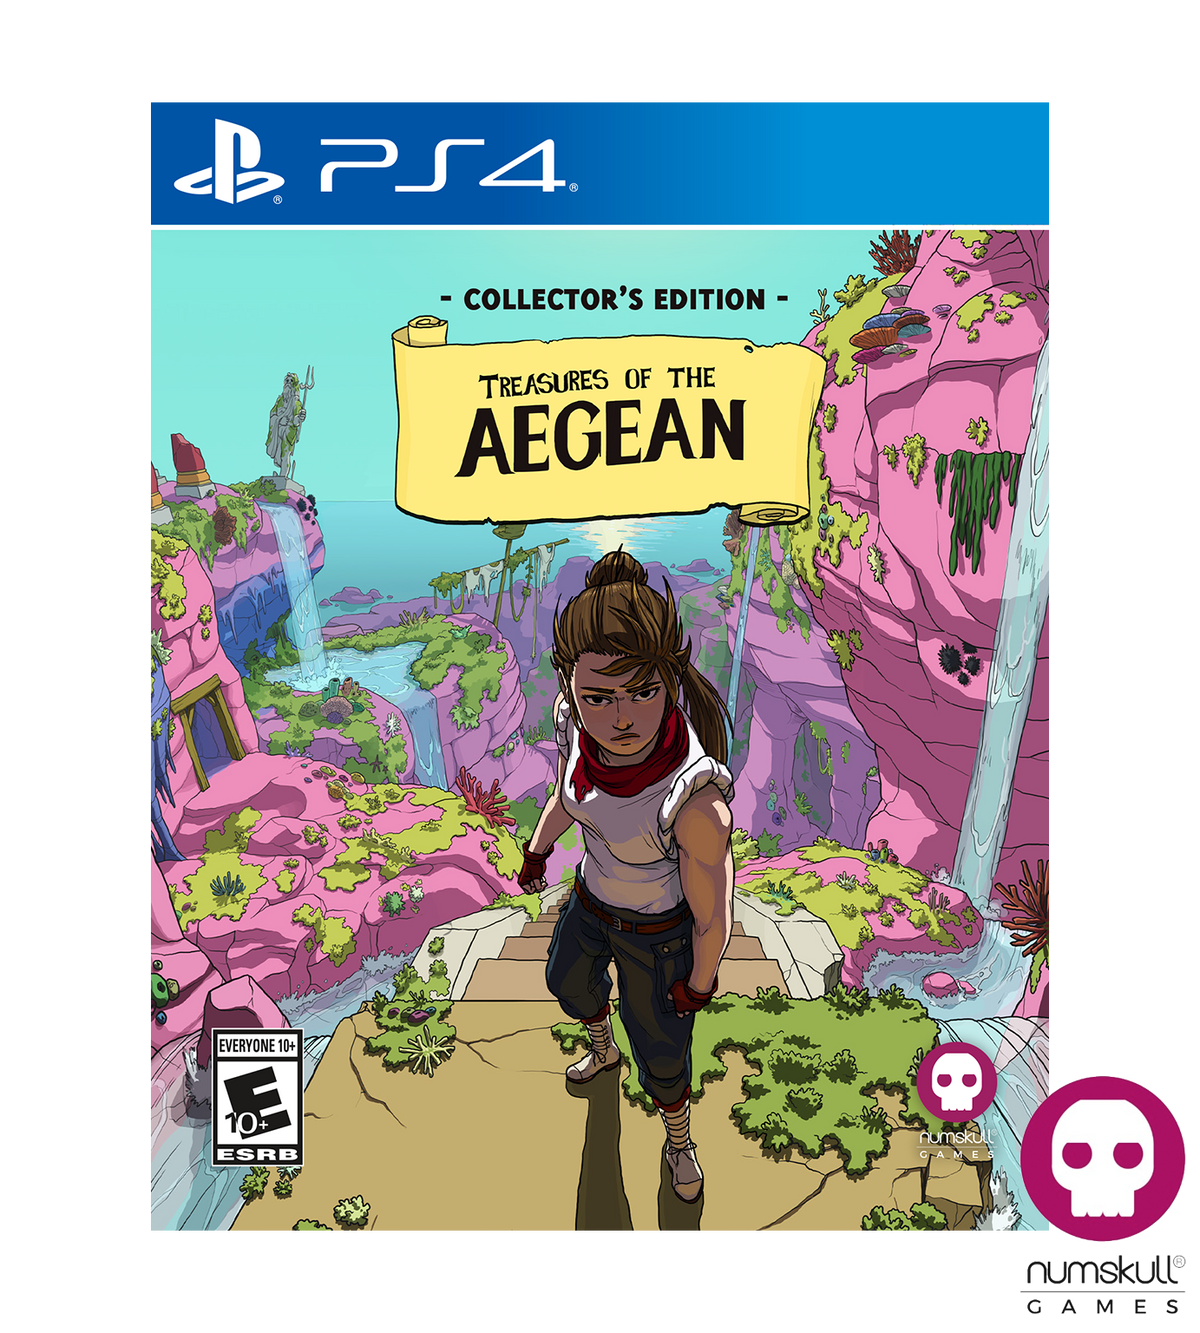 Treasures of the Aegean Collector's Edition (PS4)